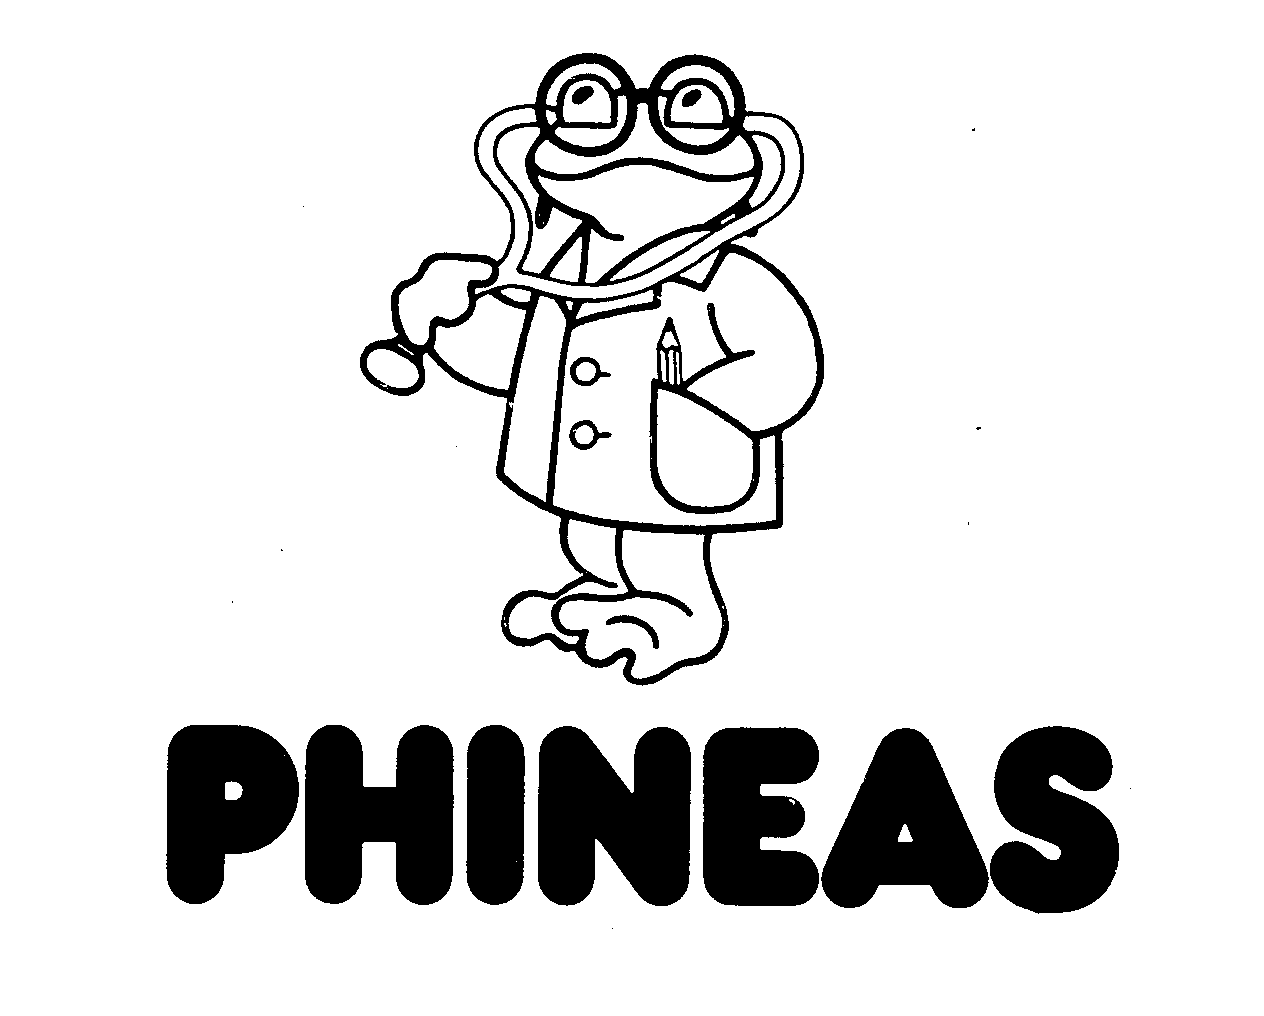  PHINEAS